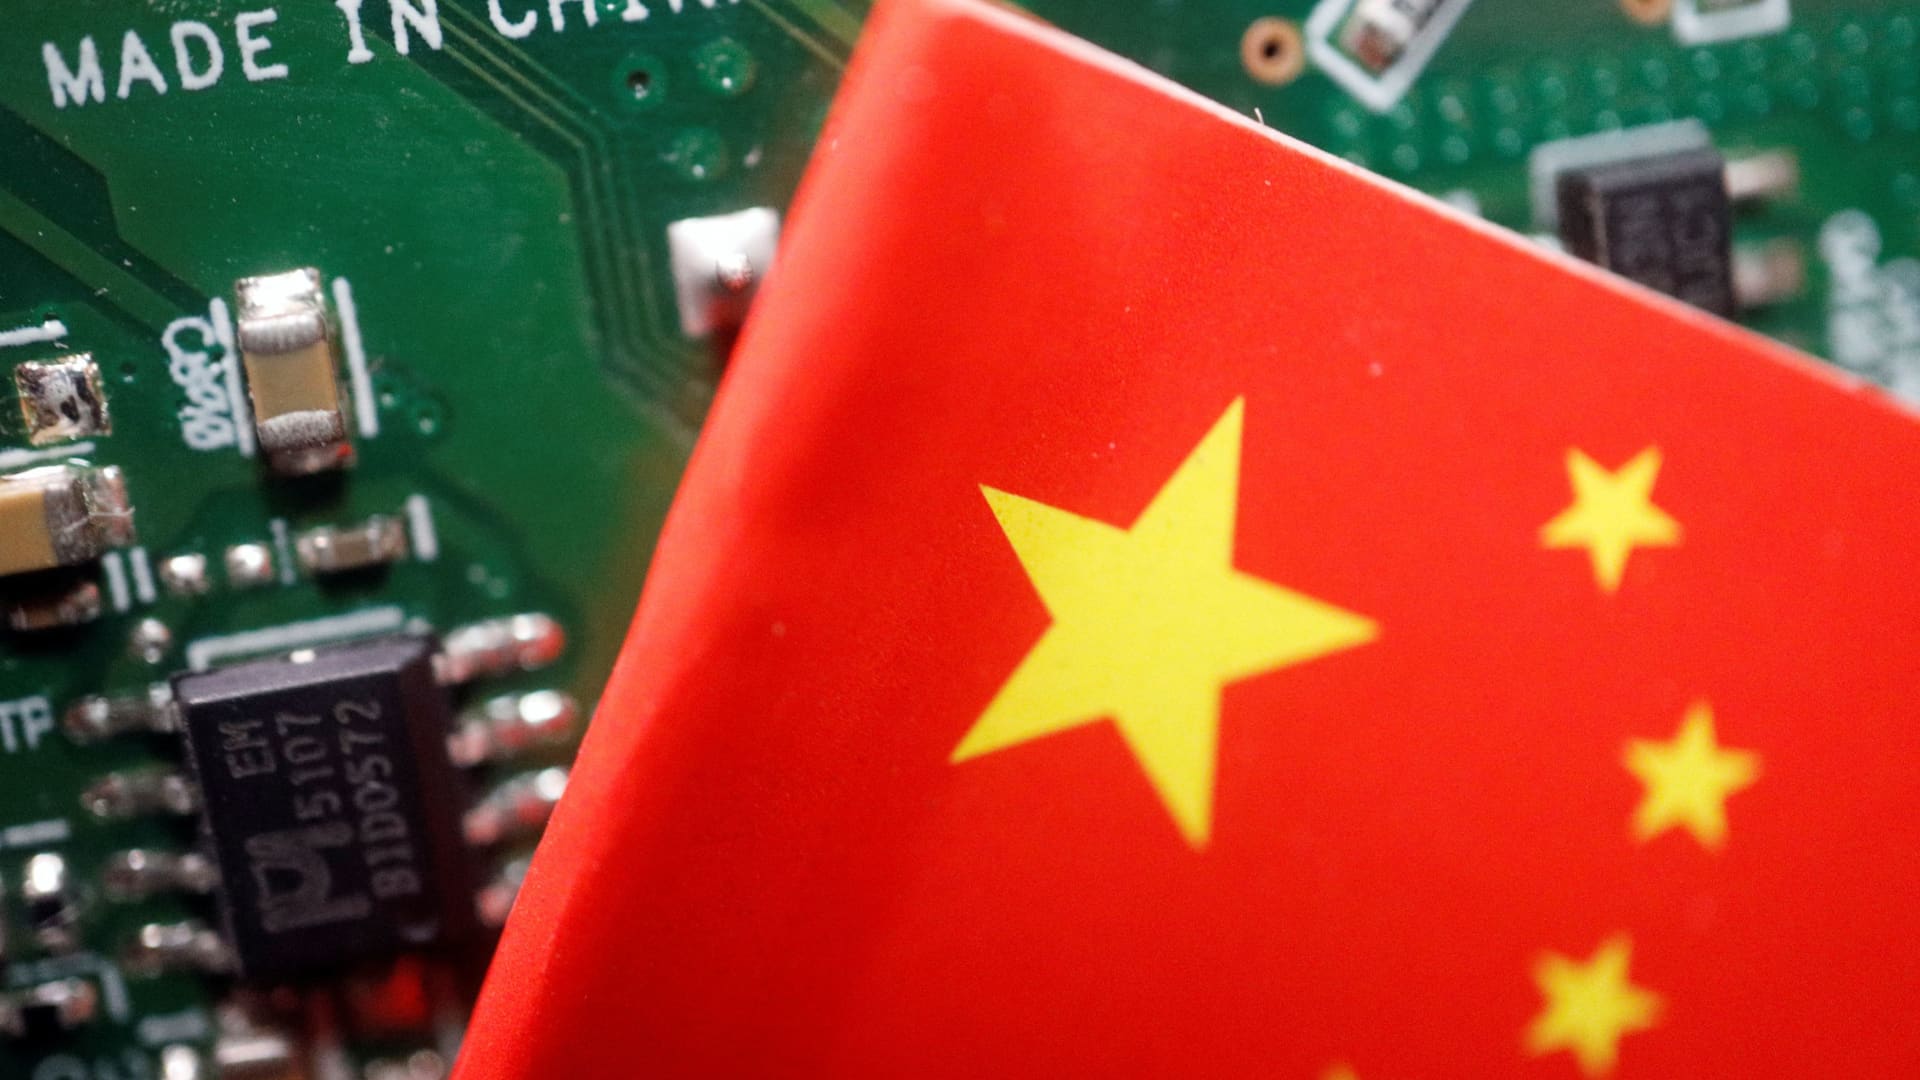 China may be making more advanced chips despite U.S. sanctions — but it still faces big problems